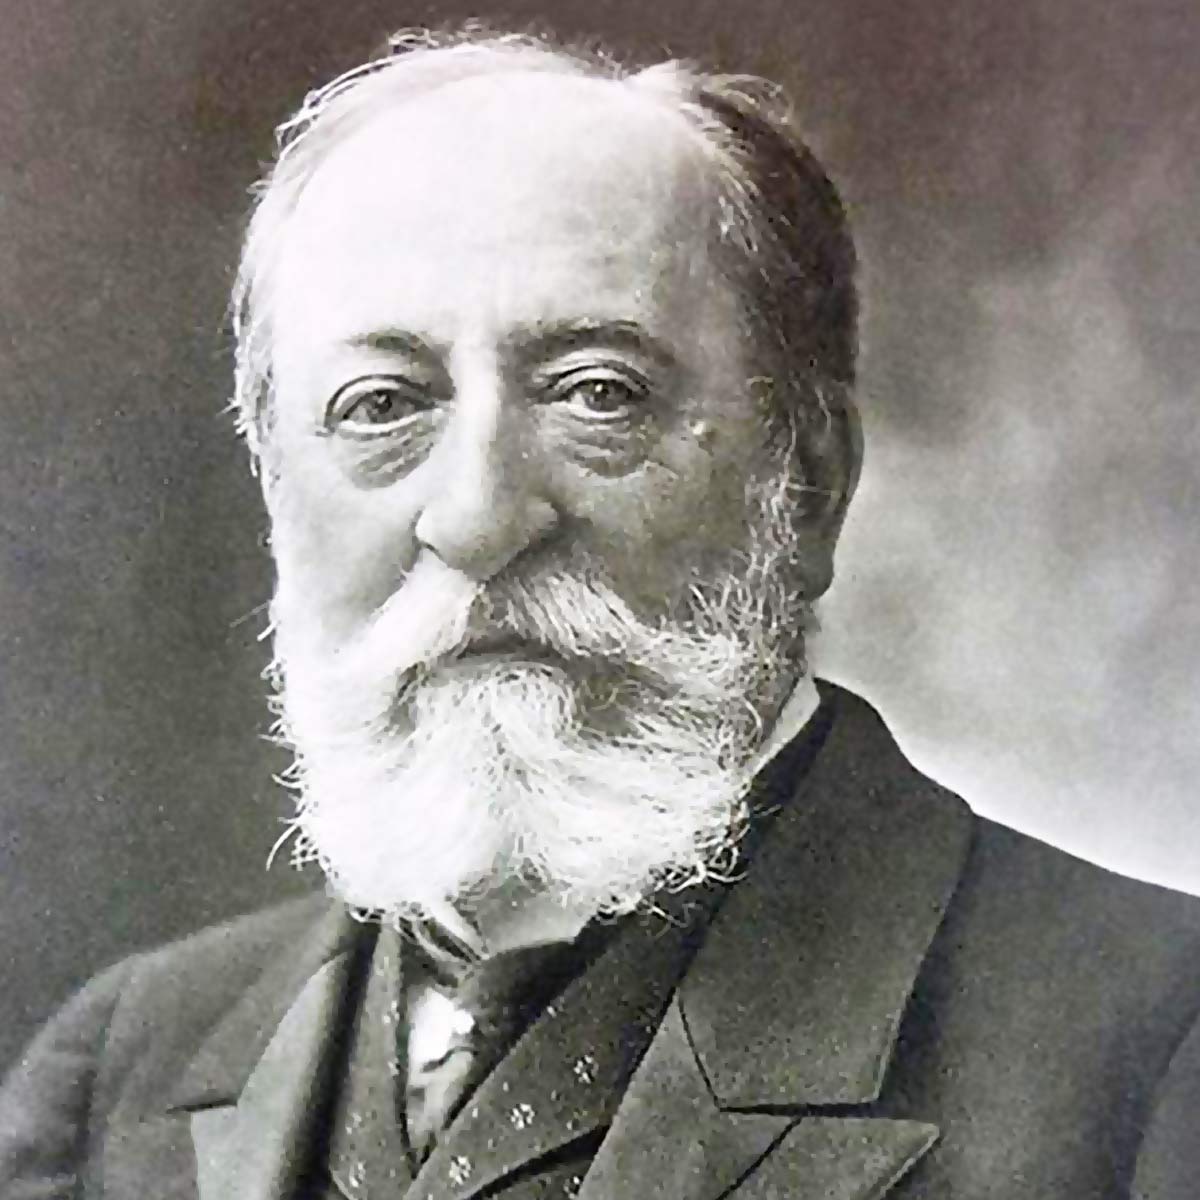 October Composer of the Month - Camille Saint-Saëns - The